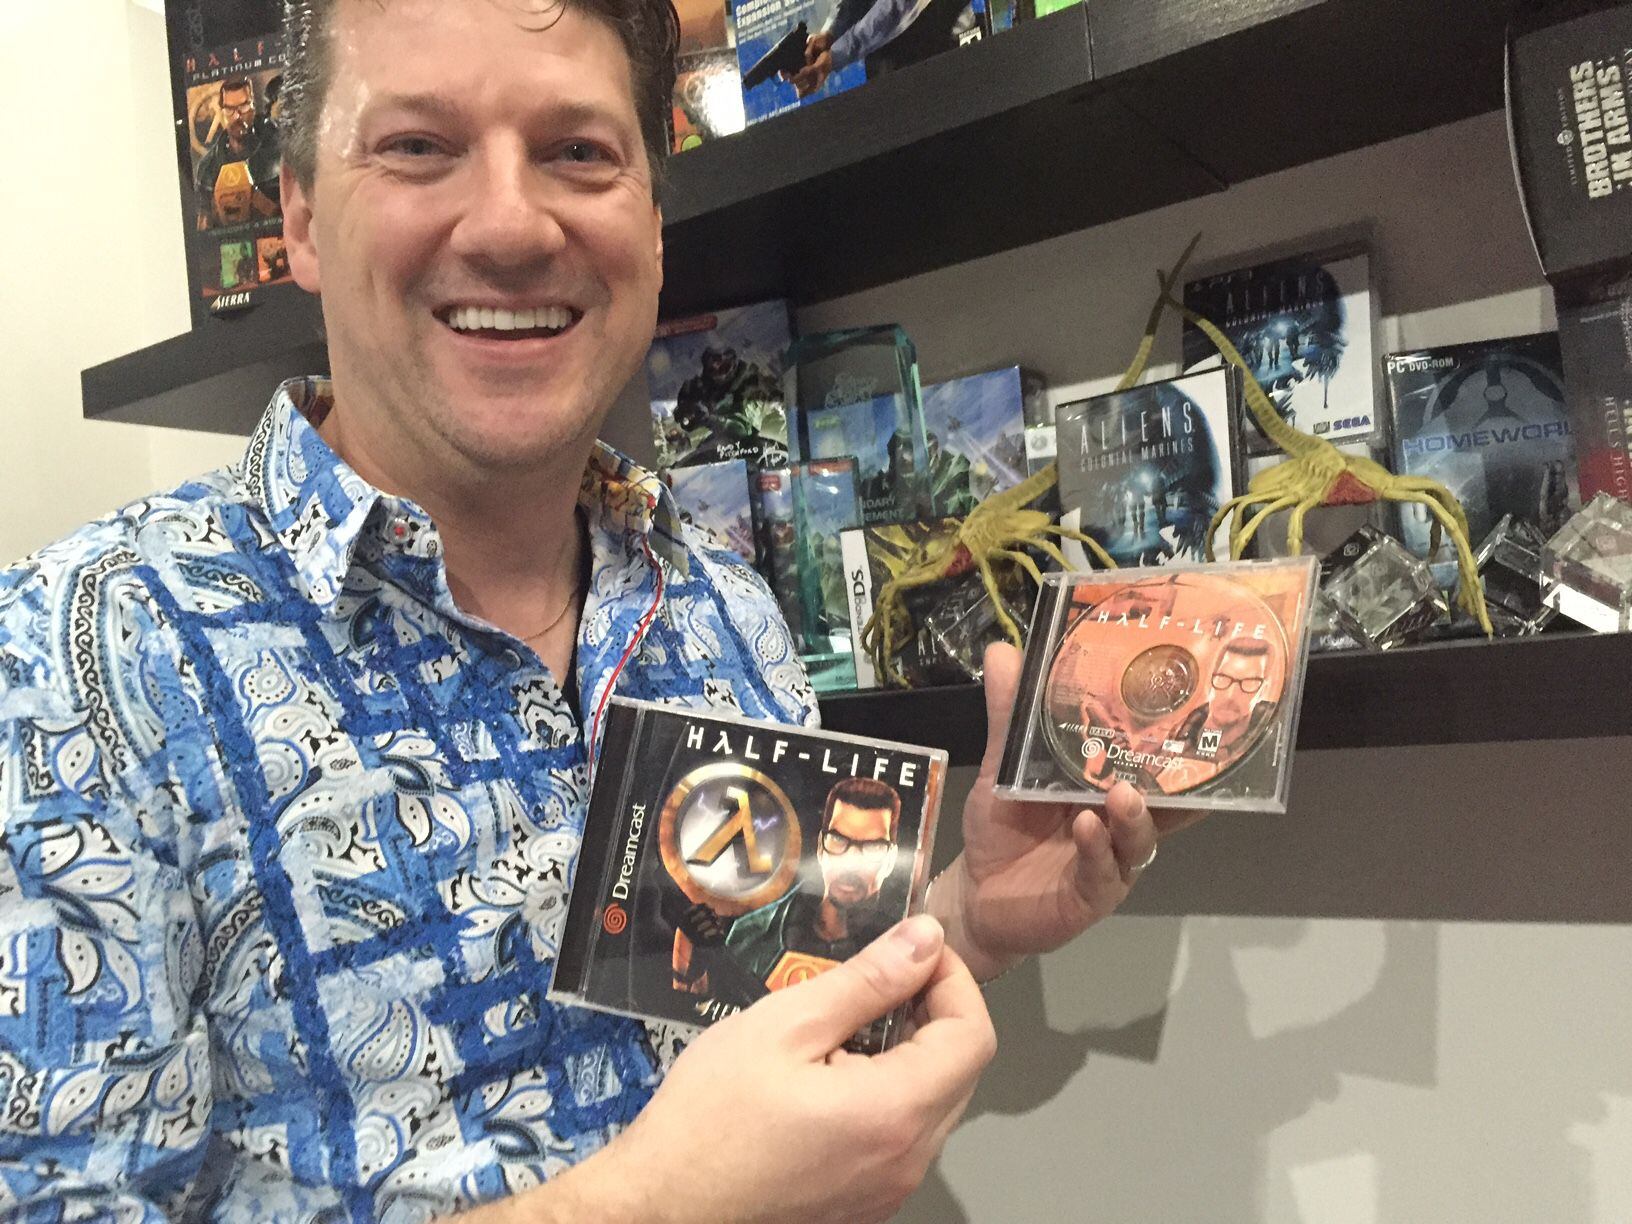 Randy Pitchford showing off copies of Half-Life for the Dreamcast -- a game that was fully developed but never released in stores.